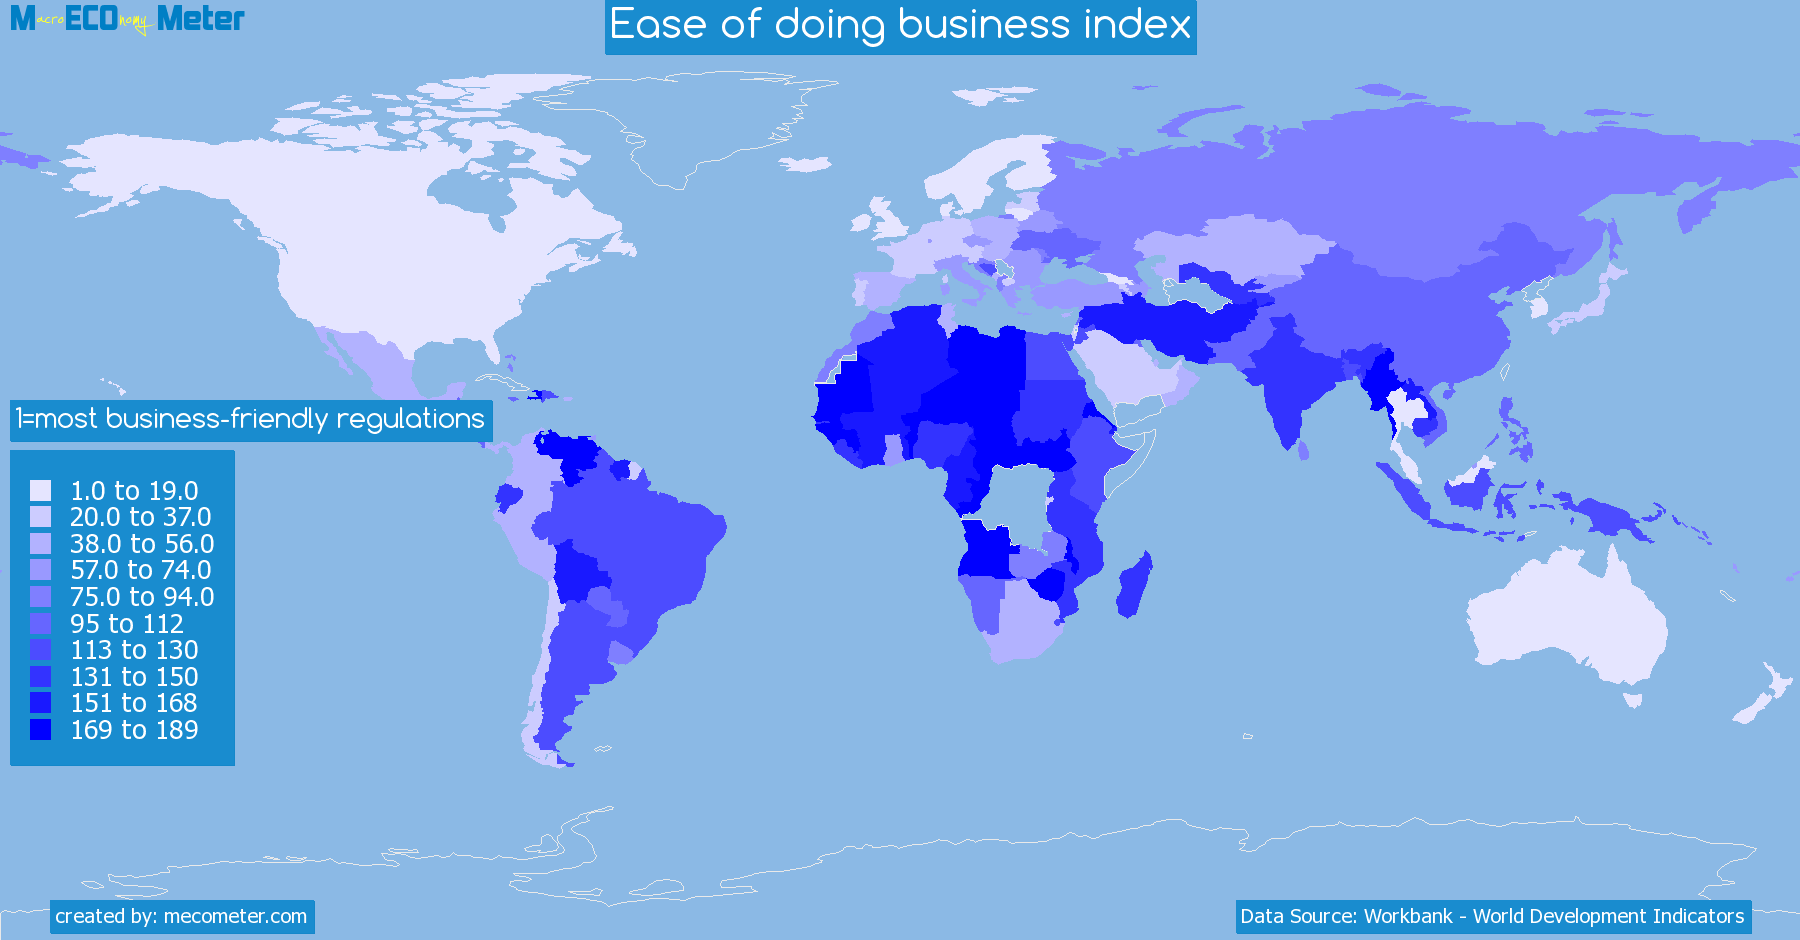 Worldmap of all countries colored to reflect the values of Ease of doing business index